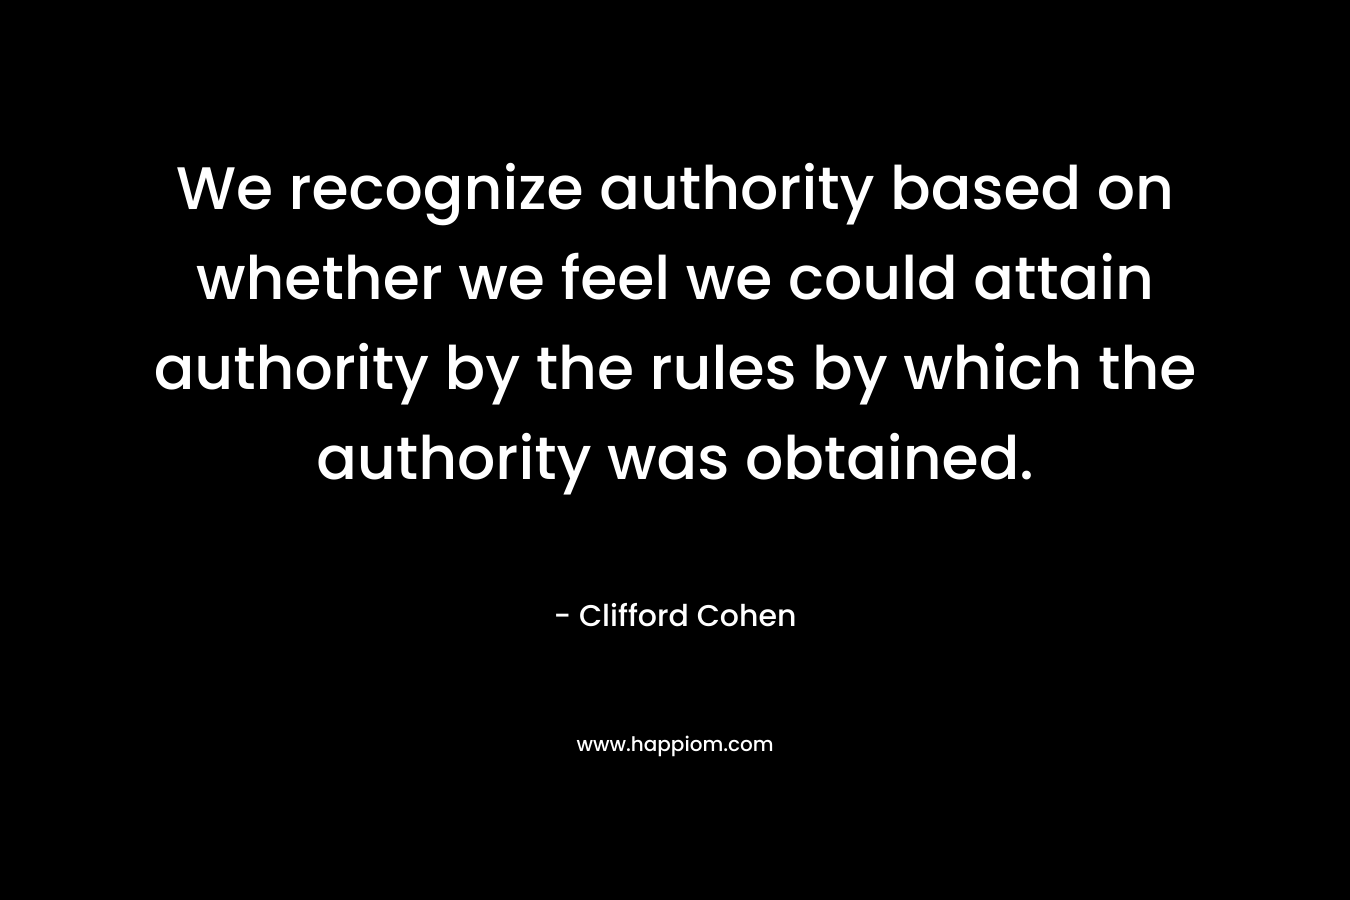 We recognize authority based on whether we feel we could attain authority by the rules by which the authority was obtained.